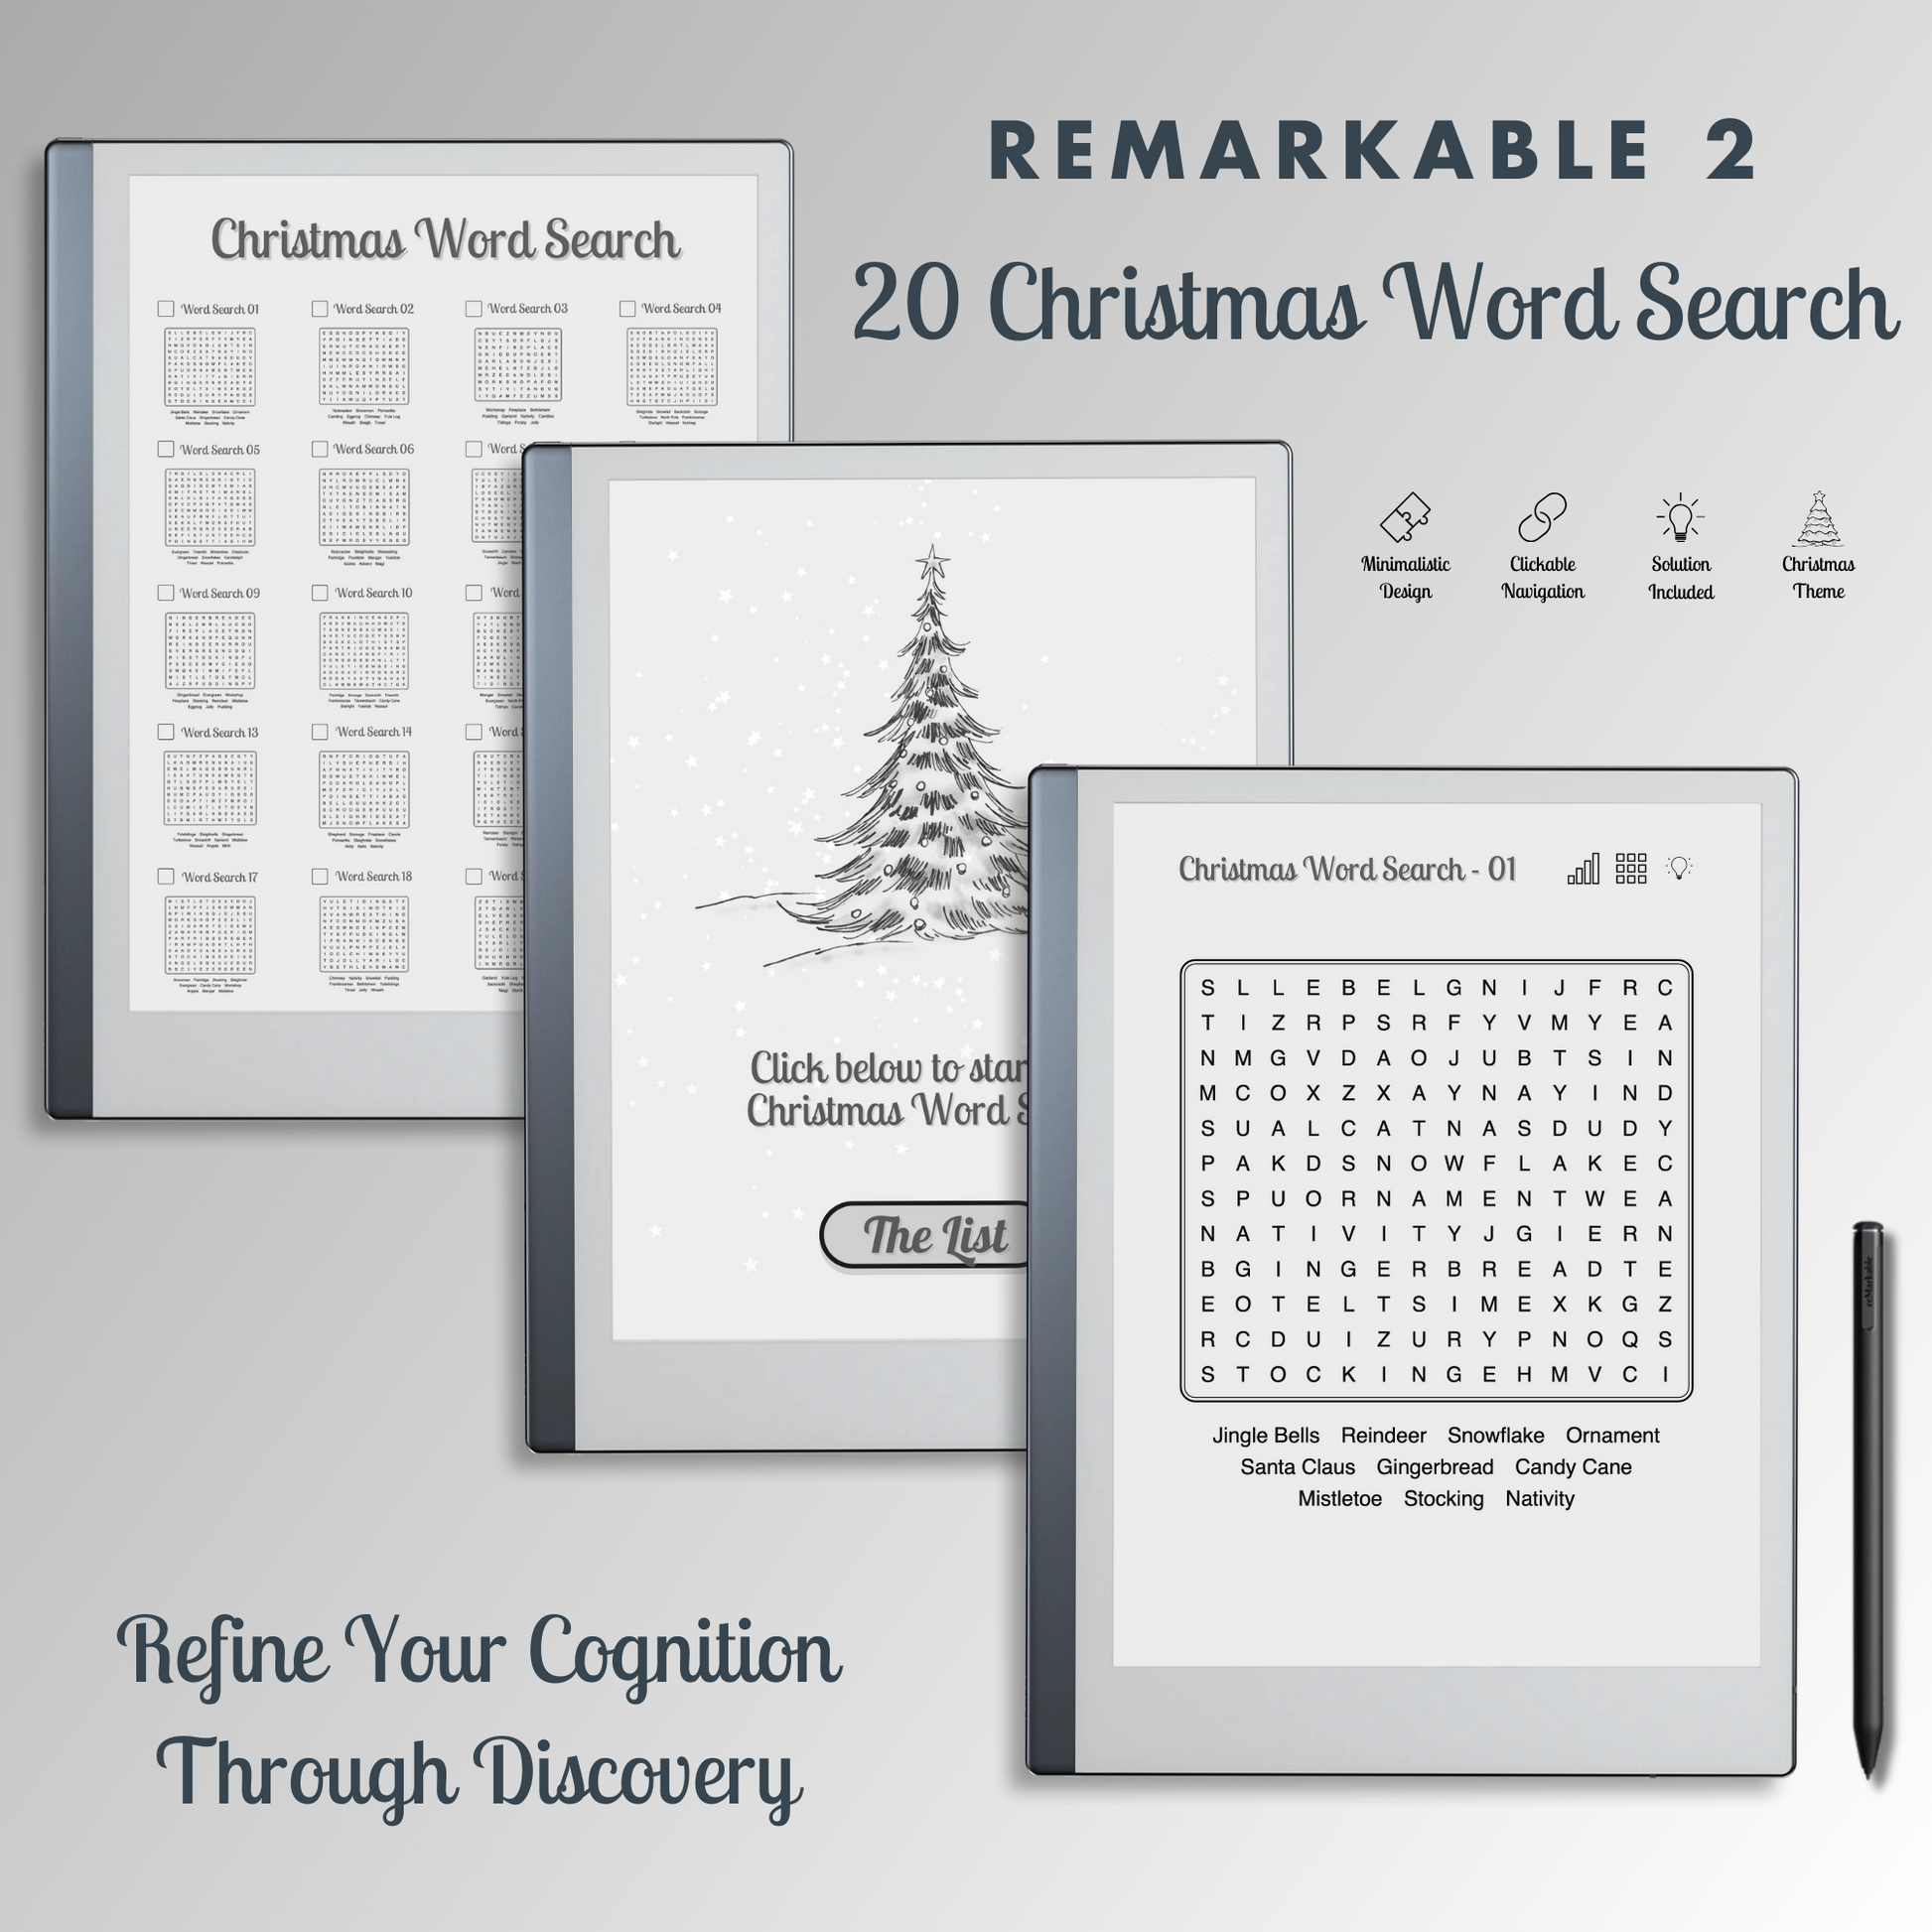 This is a Digital Download of 20 Christmas Word Search Puzzles designed for Remarkable 2.